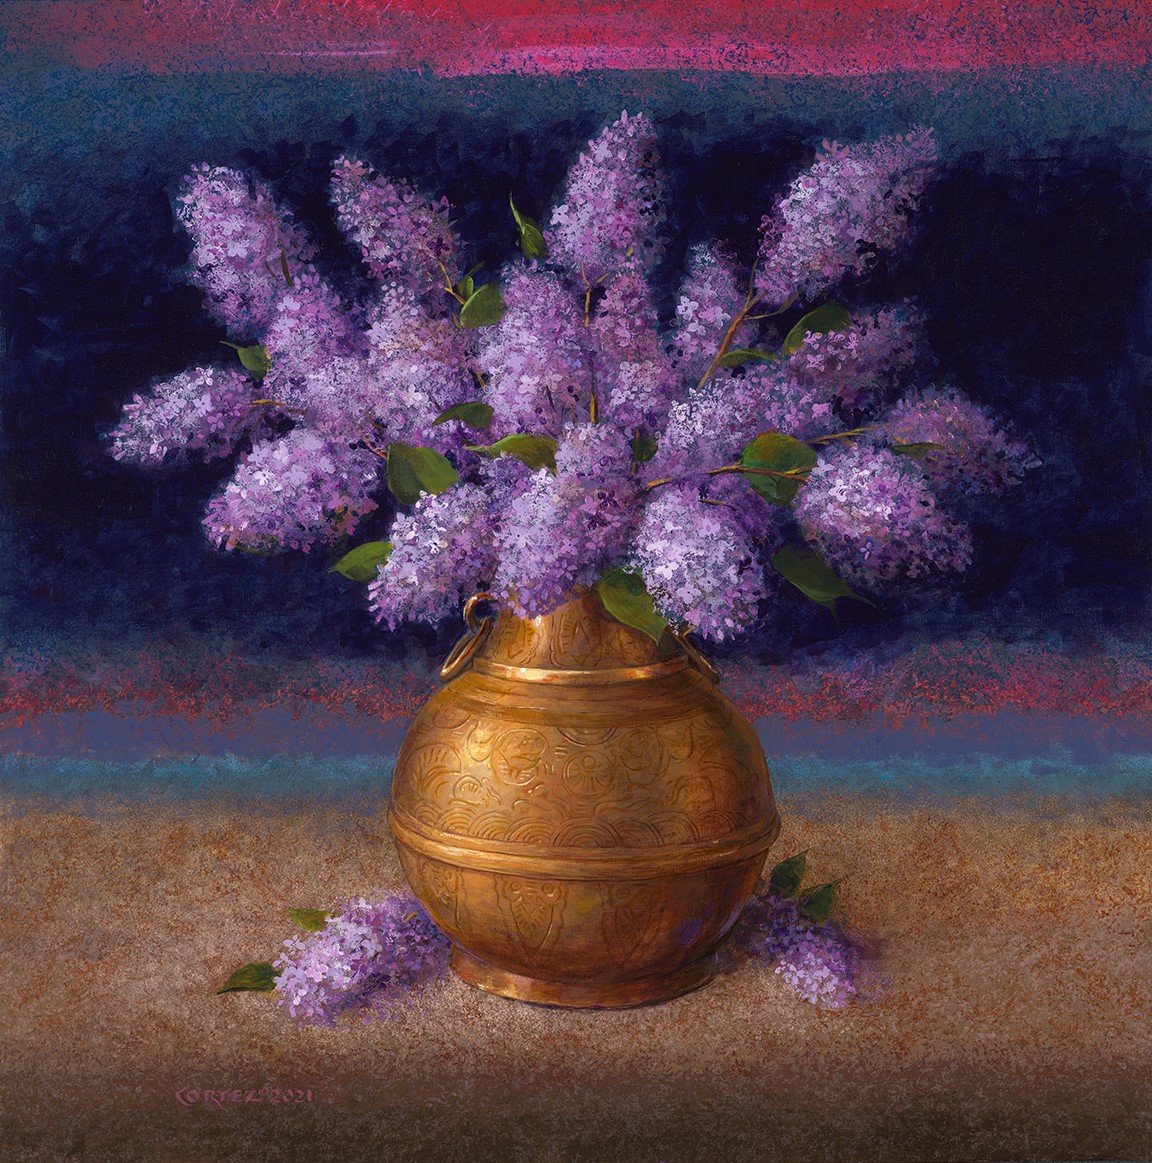 The Scent of Lilacs ©Jenness Cortez